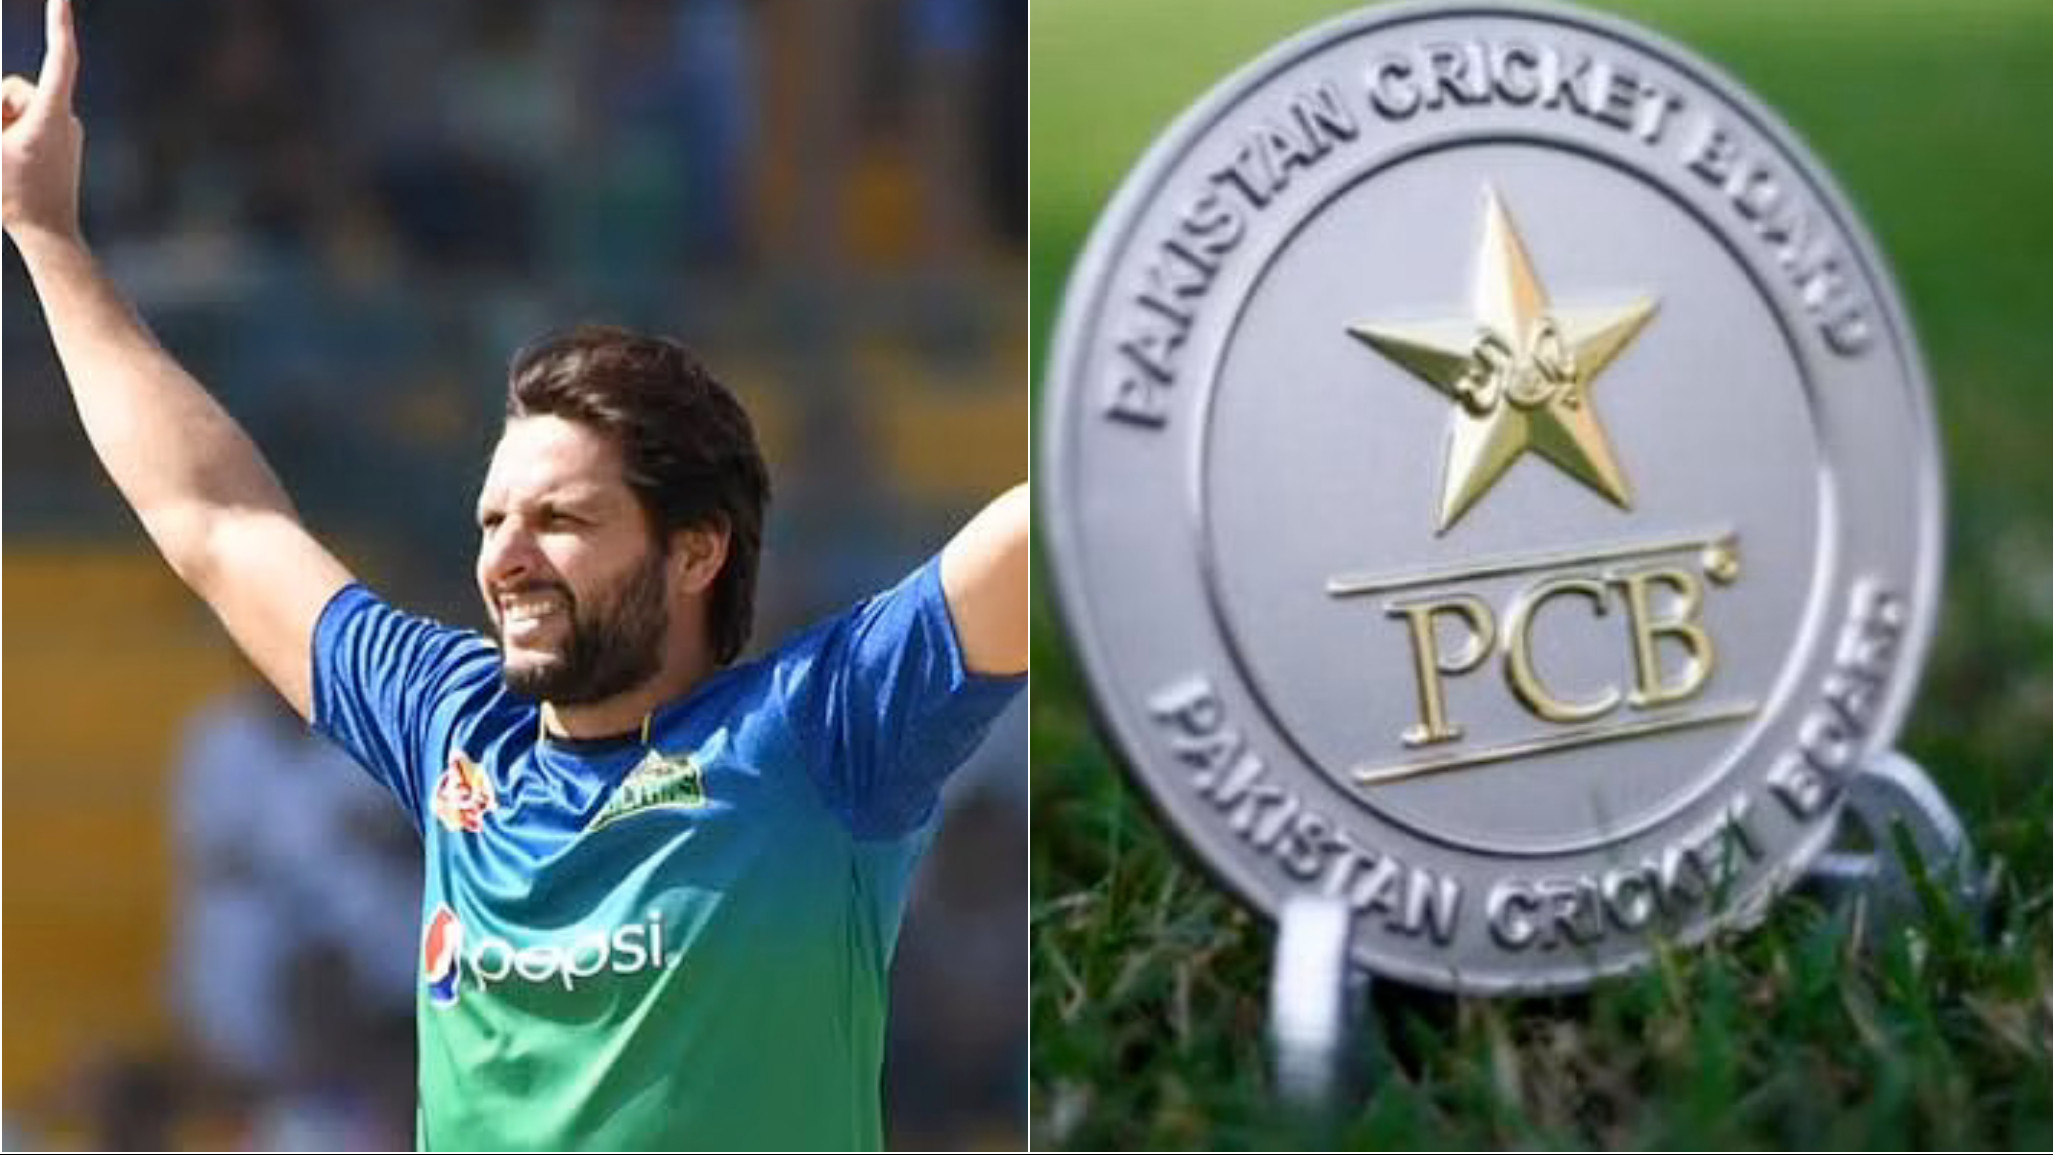 “I feel the PCB should be independent from the government” feels Shahid Afridi